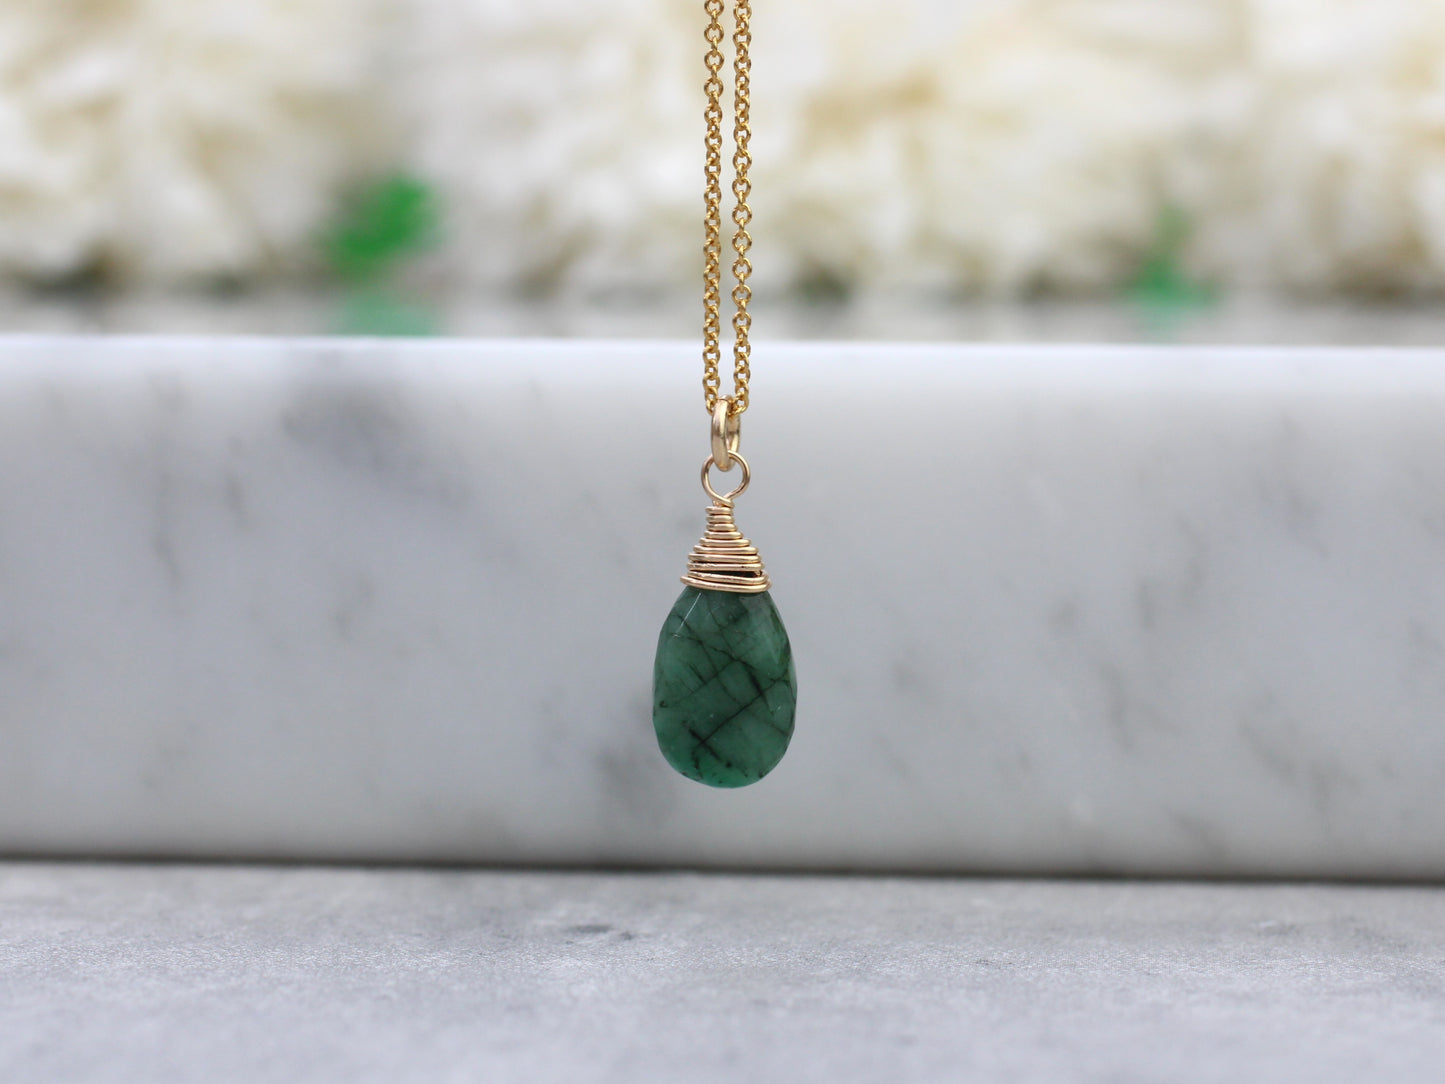 Emerald necklace in silver or gold.